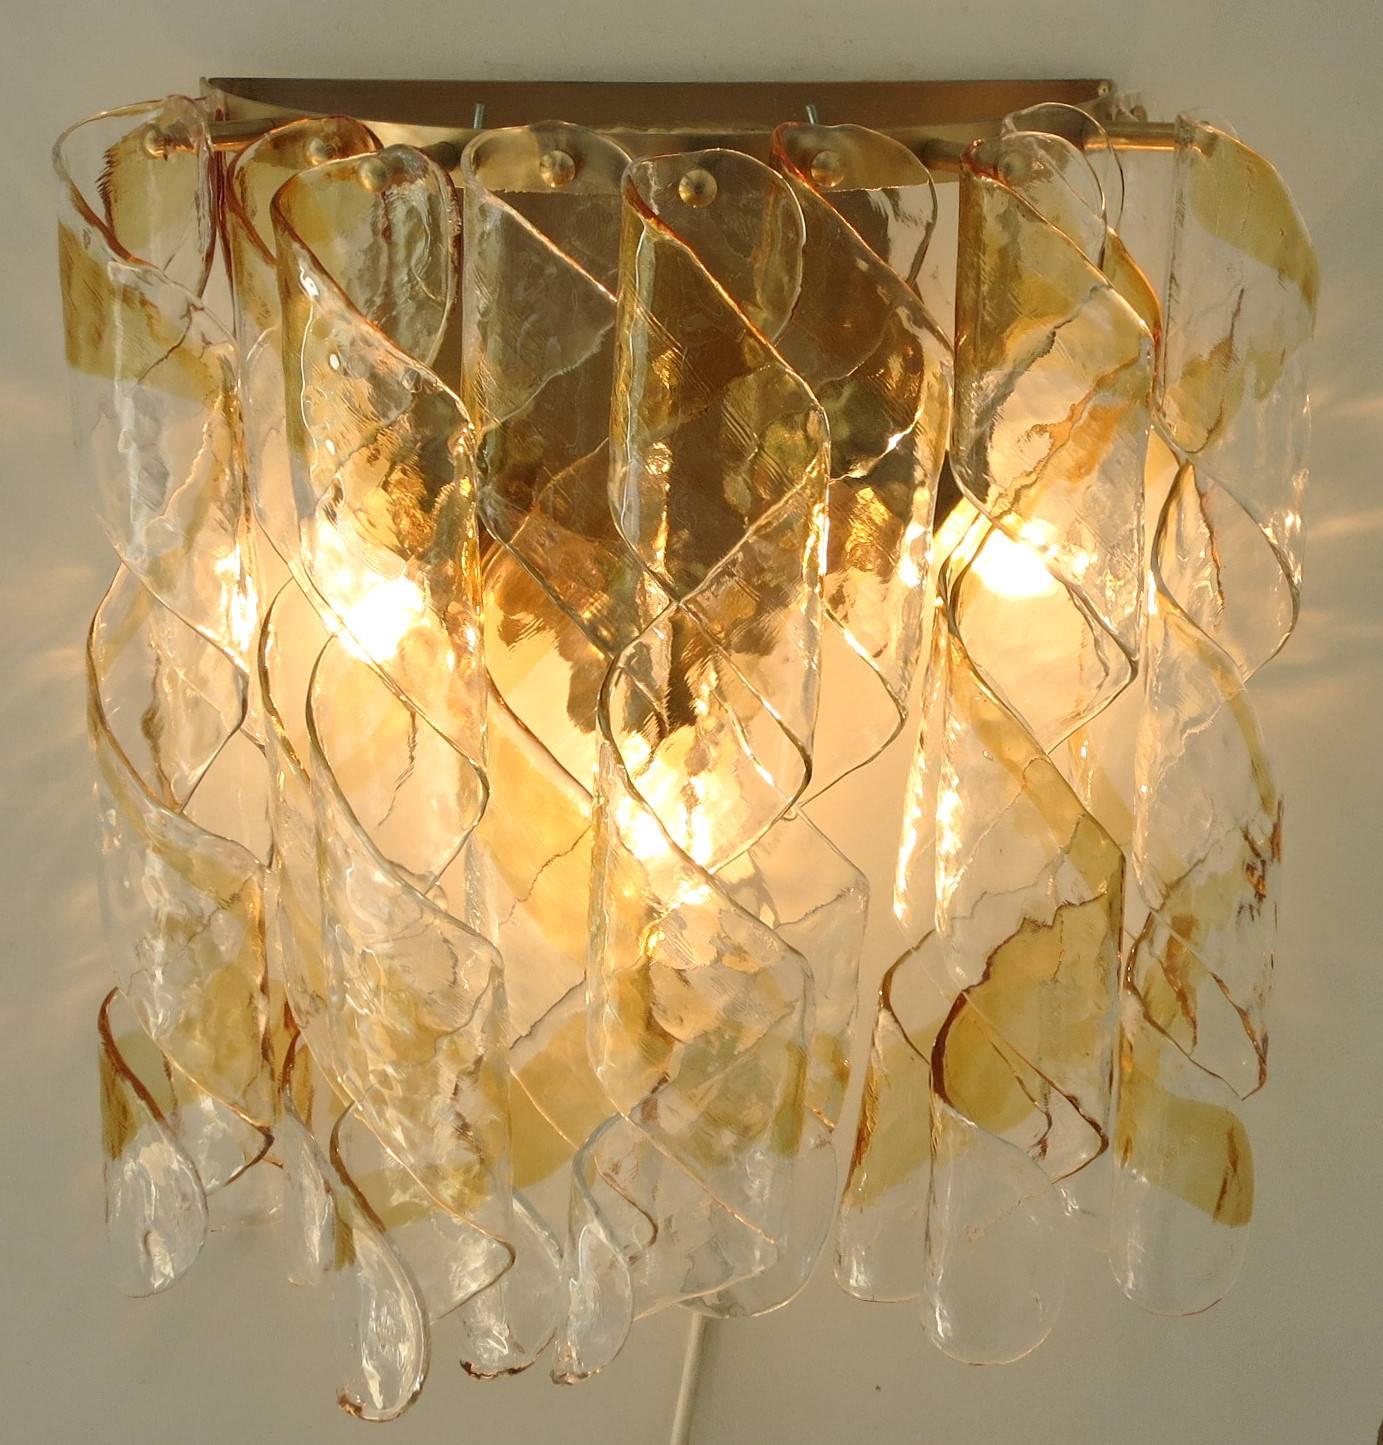 Original vintage pair of Italian wall lights with clear and amber Murano glass spiral ribbons that form a diffused effect, mounted on brass frames / Designed by Mazzega, circa 1960’s / Made in Italy
3 lights / E26 or E27 type / max 40W each
Height: